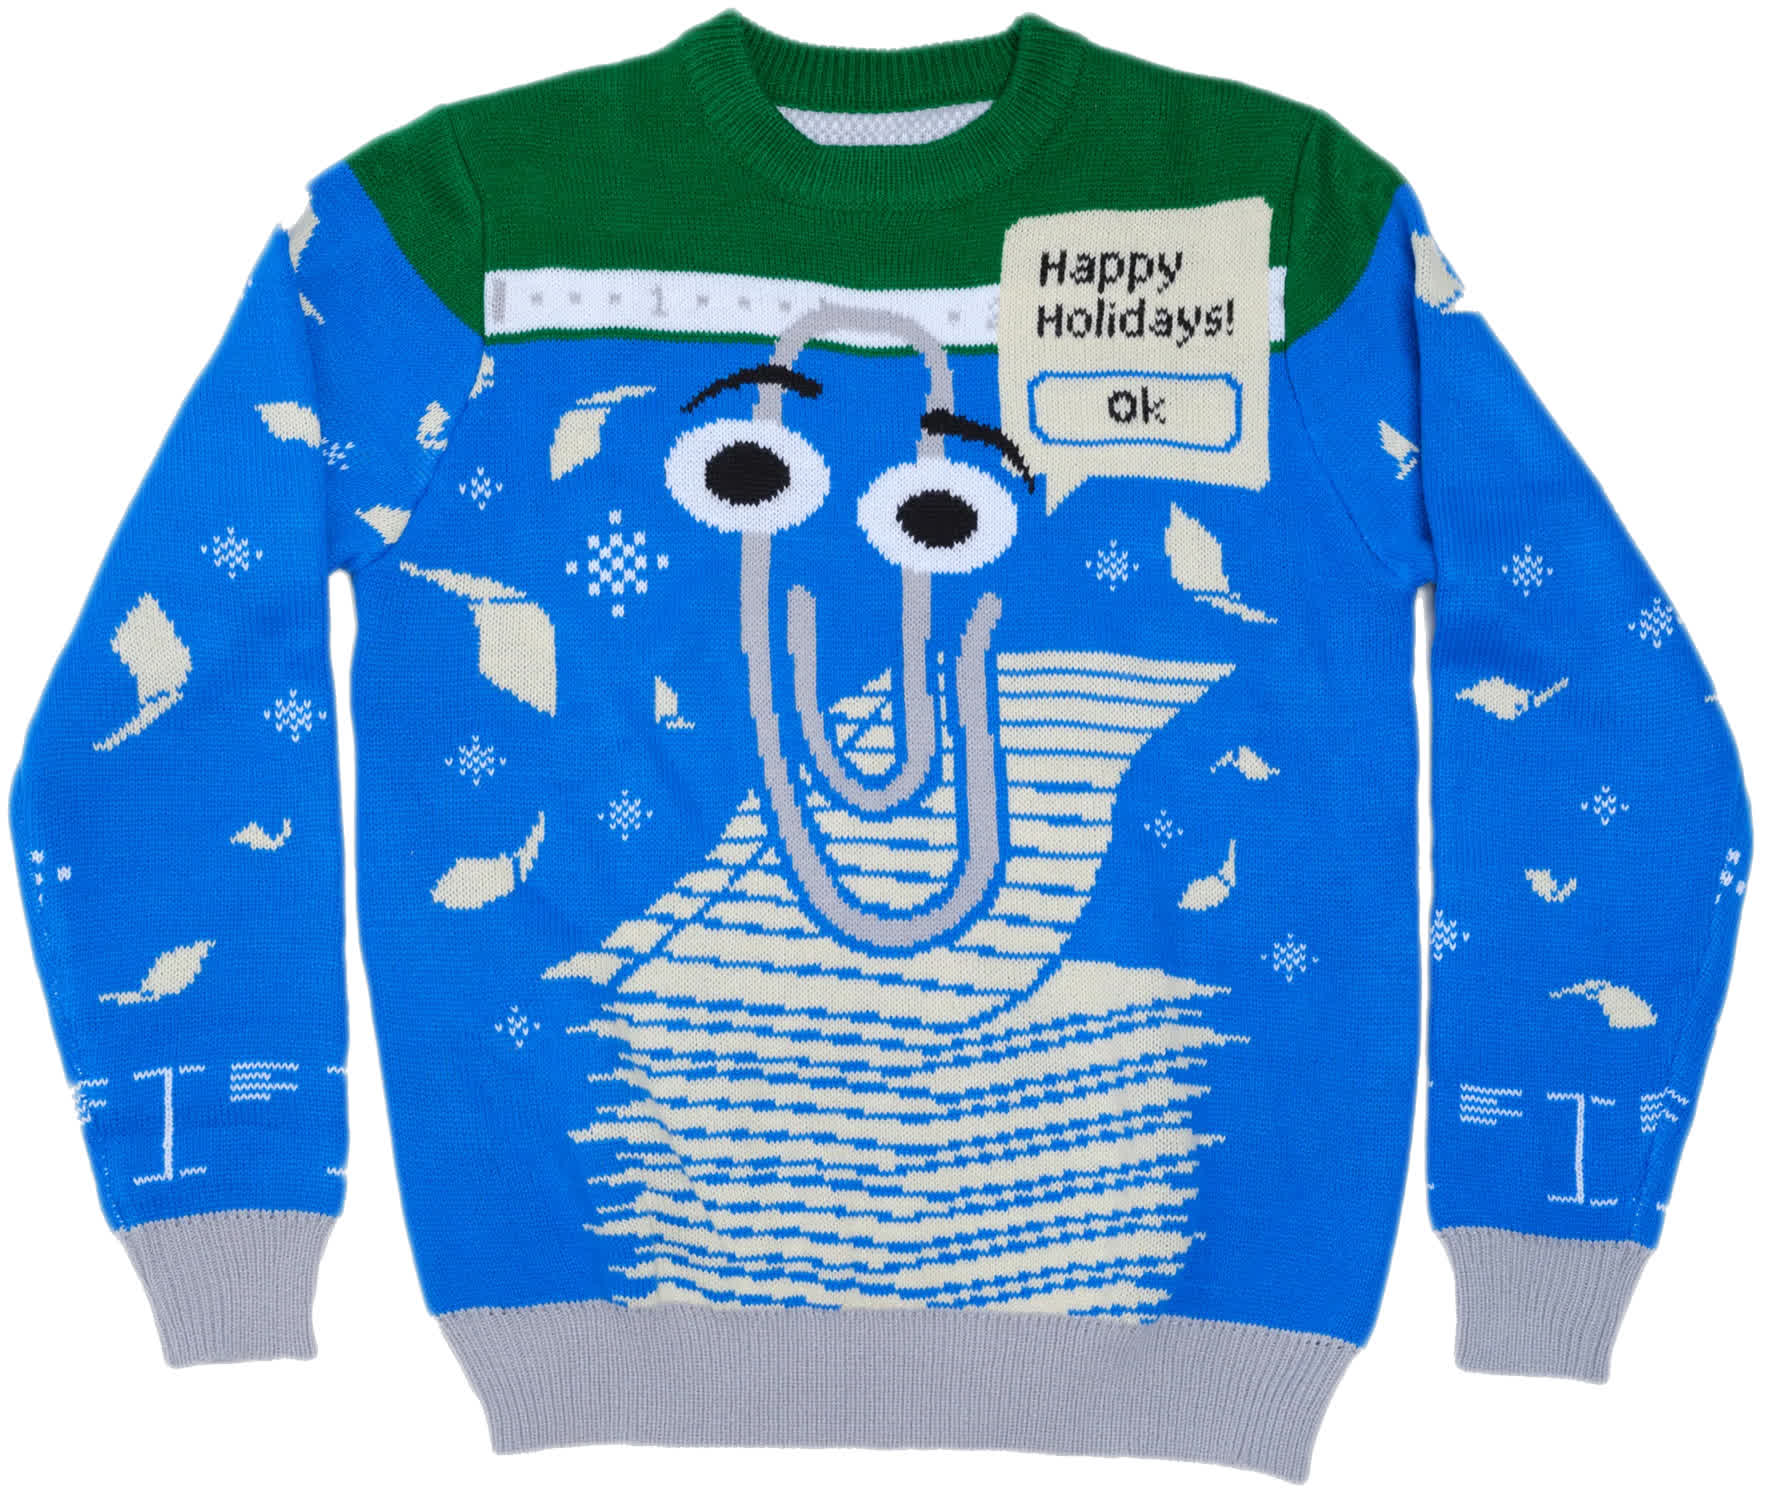 Celebrate the holidays in style with this Clippy ugly sweater